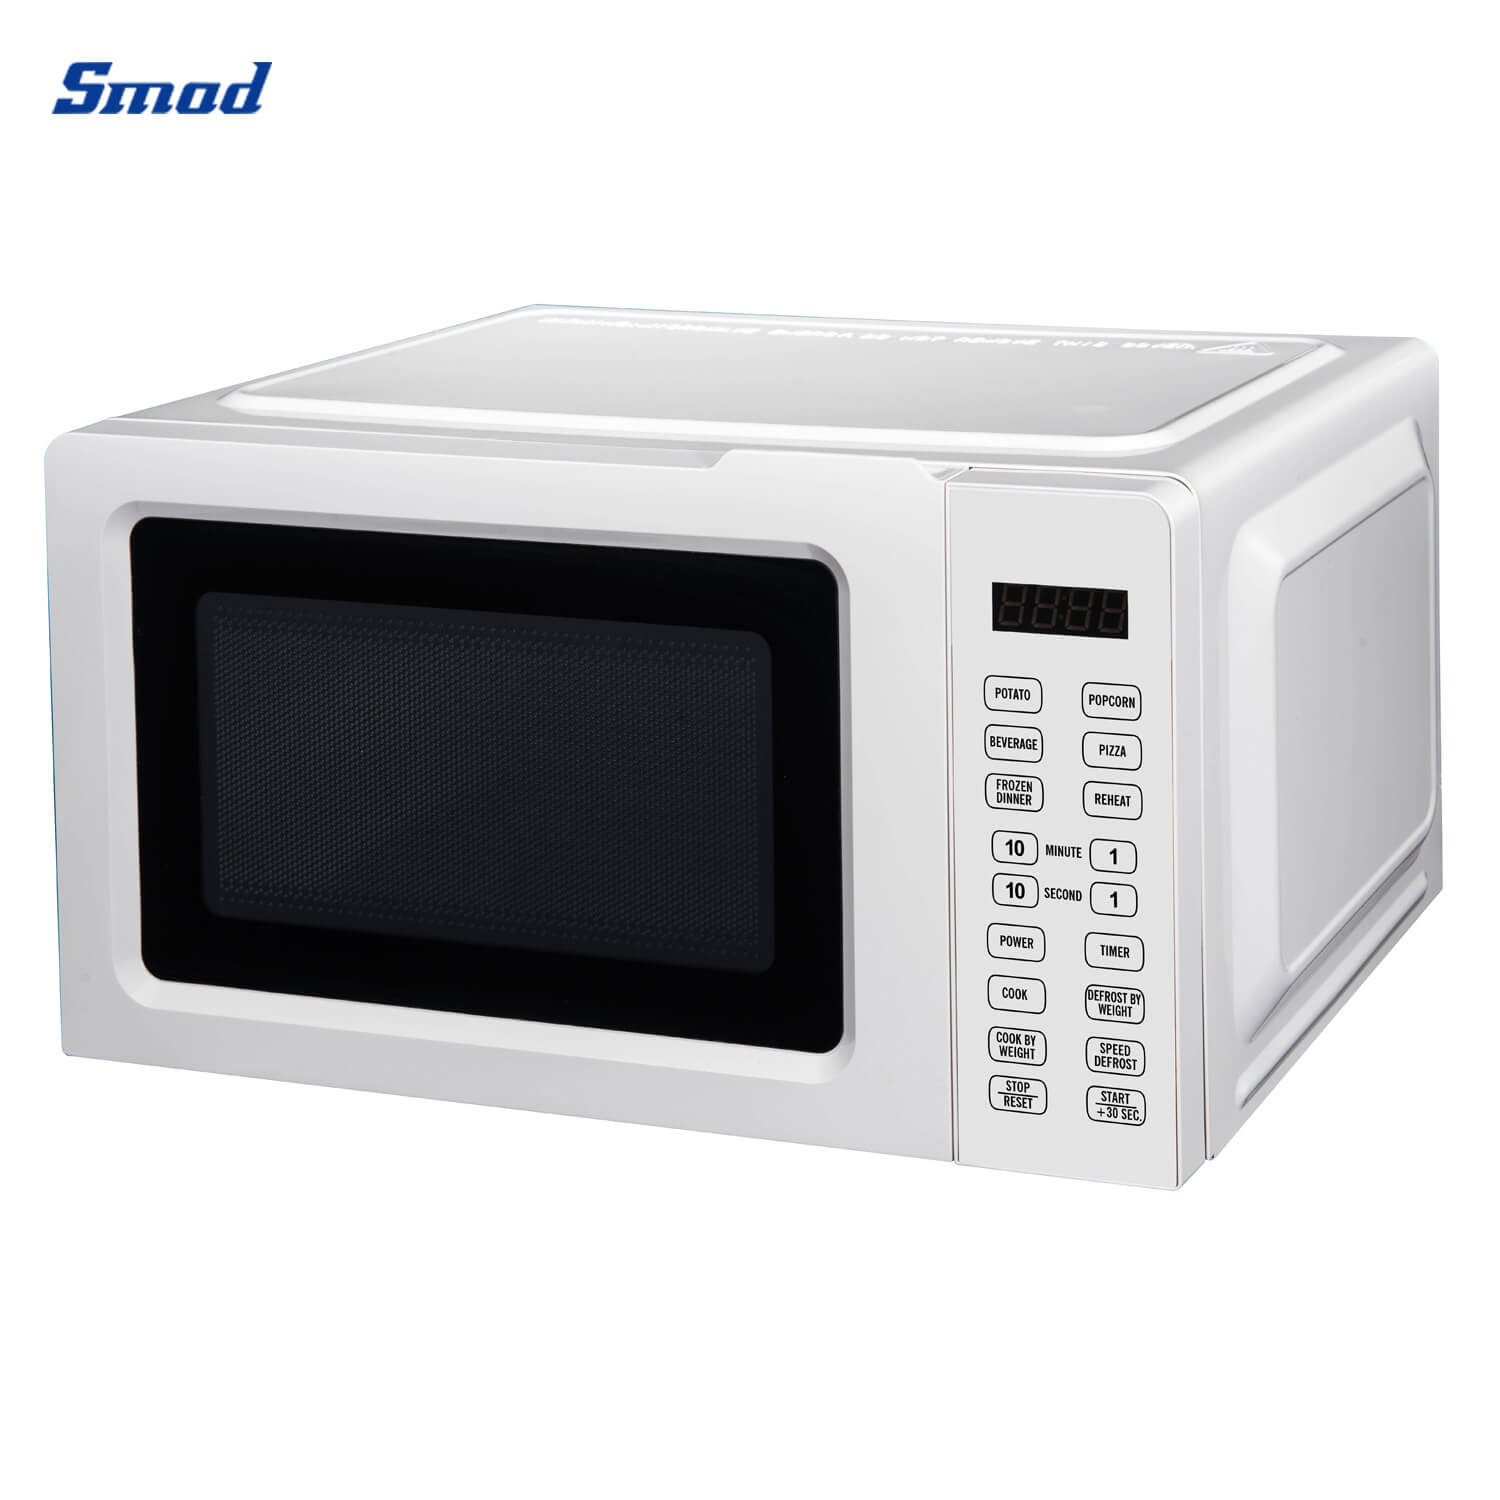 
Smad Digital Microwave Oven with Cooking End Signal